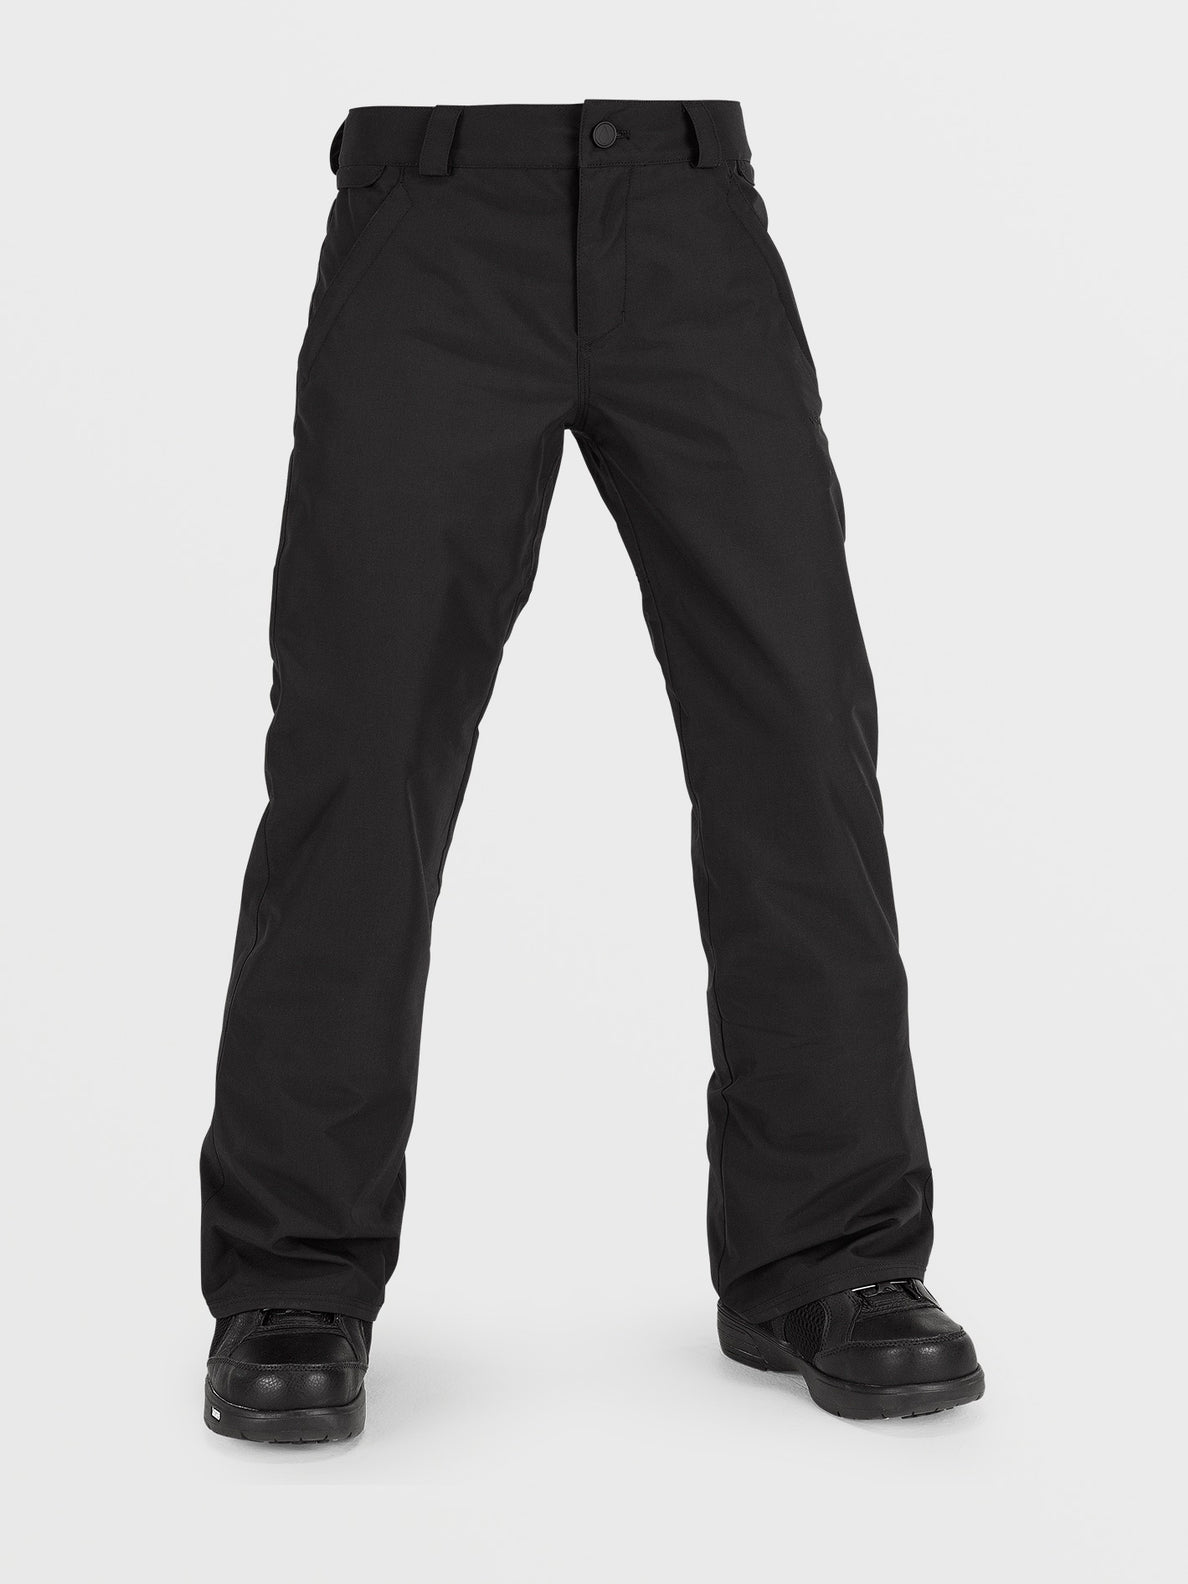 Freakin Chino Youth Ins Pant Black (I1252402_BLK) [F]